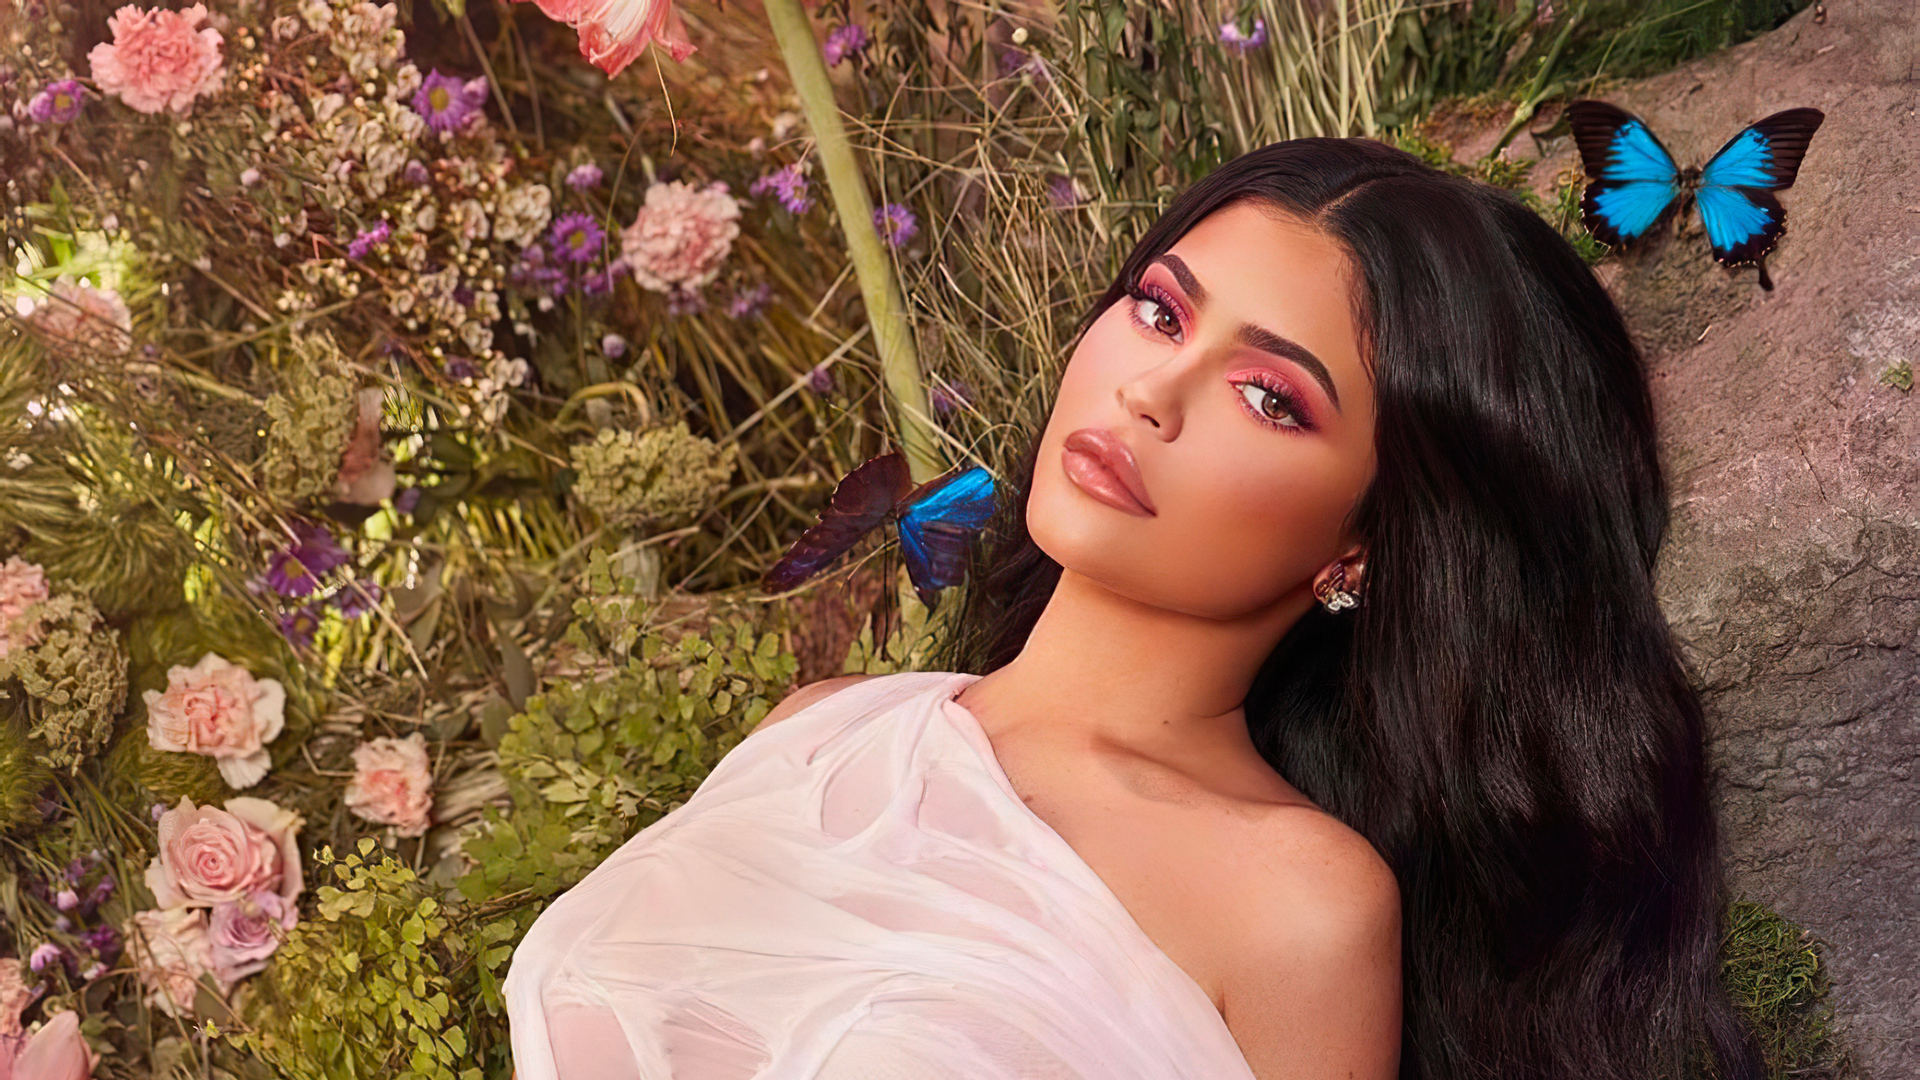 Kylie Jenner 2020 Laptop Full HD 1080P HD 4k Wallpaper, Image, Background, Photo and Picture